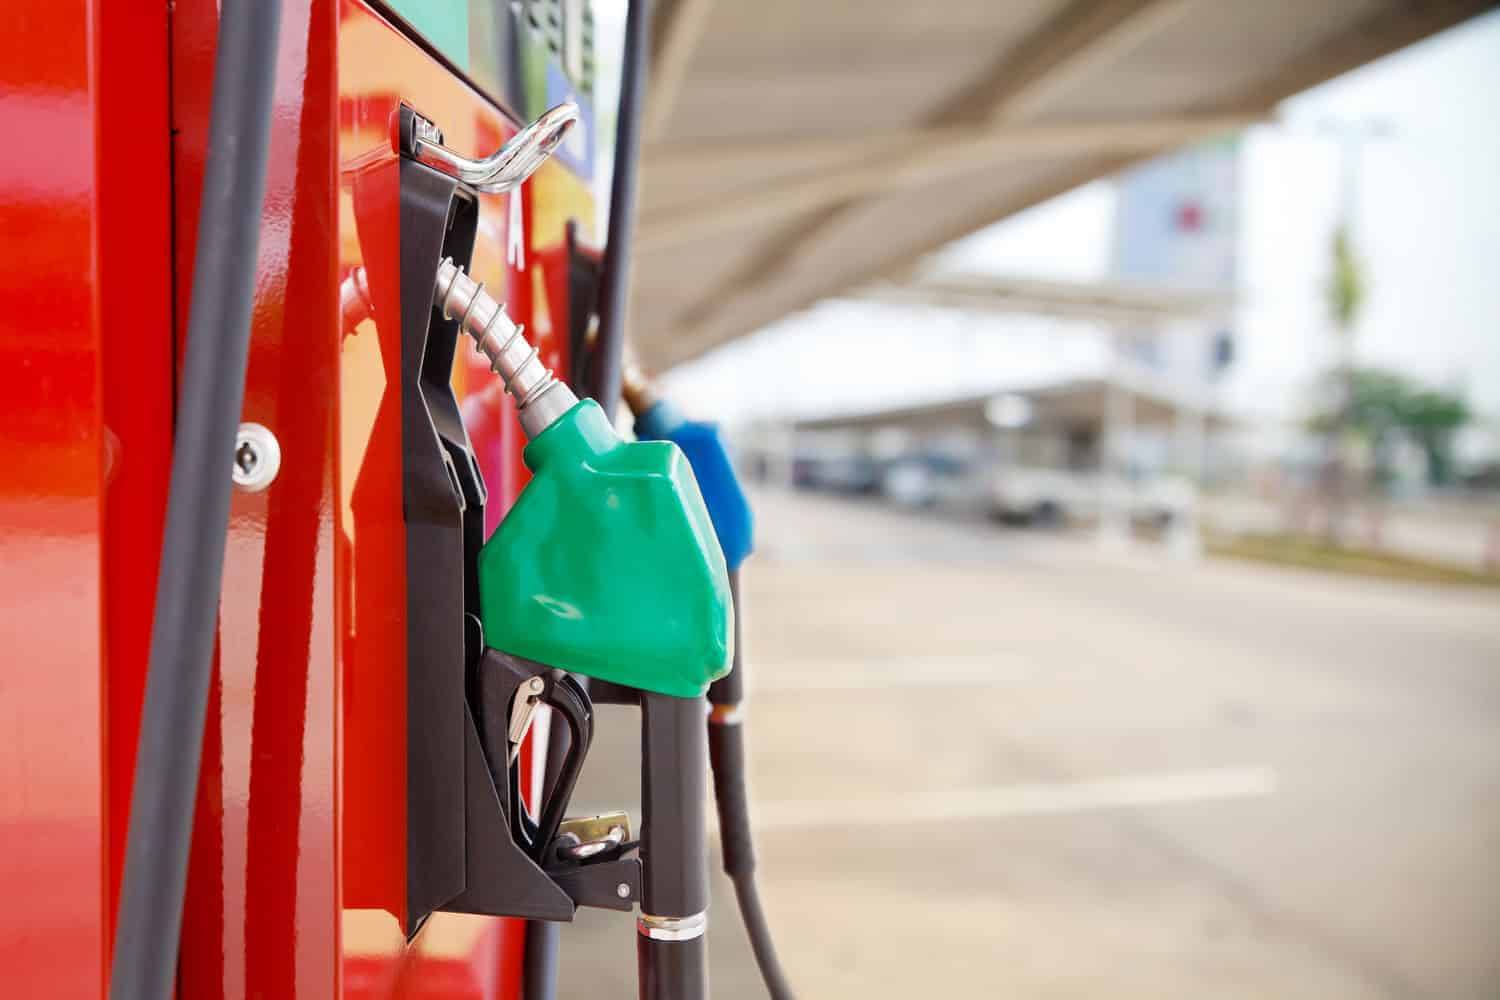 Bahamas Government considering options’ to address high fuel prices